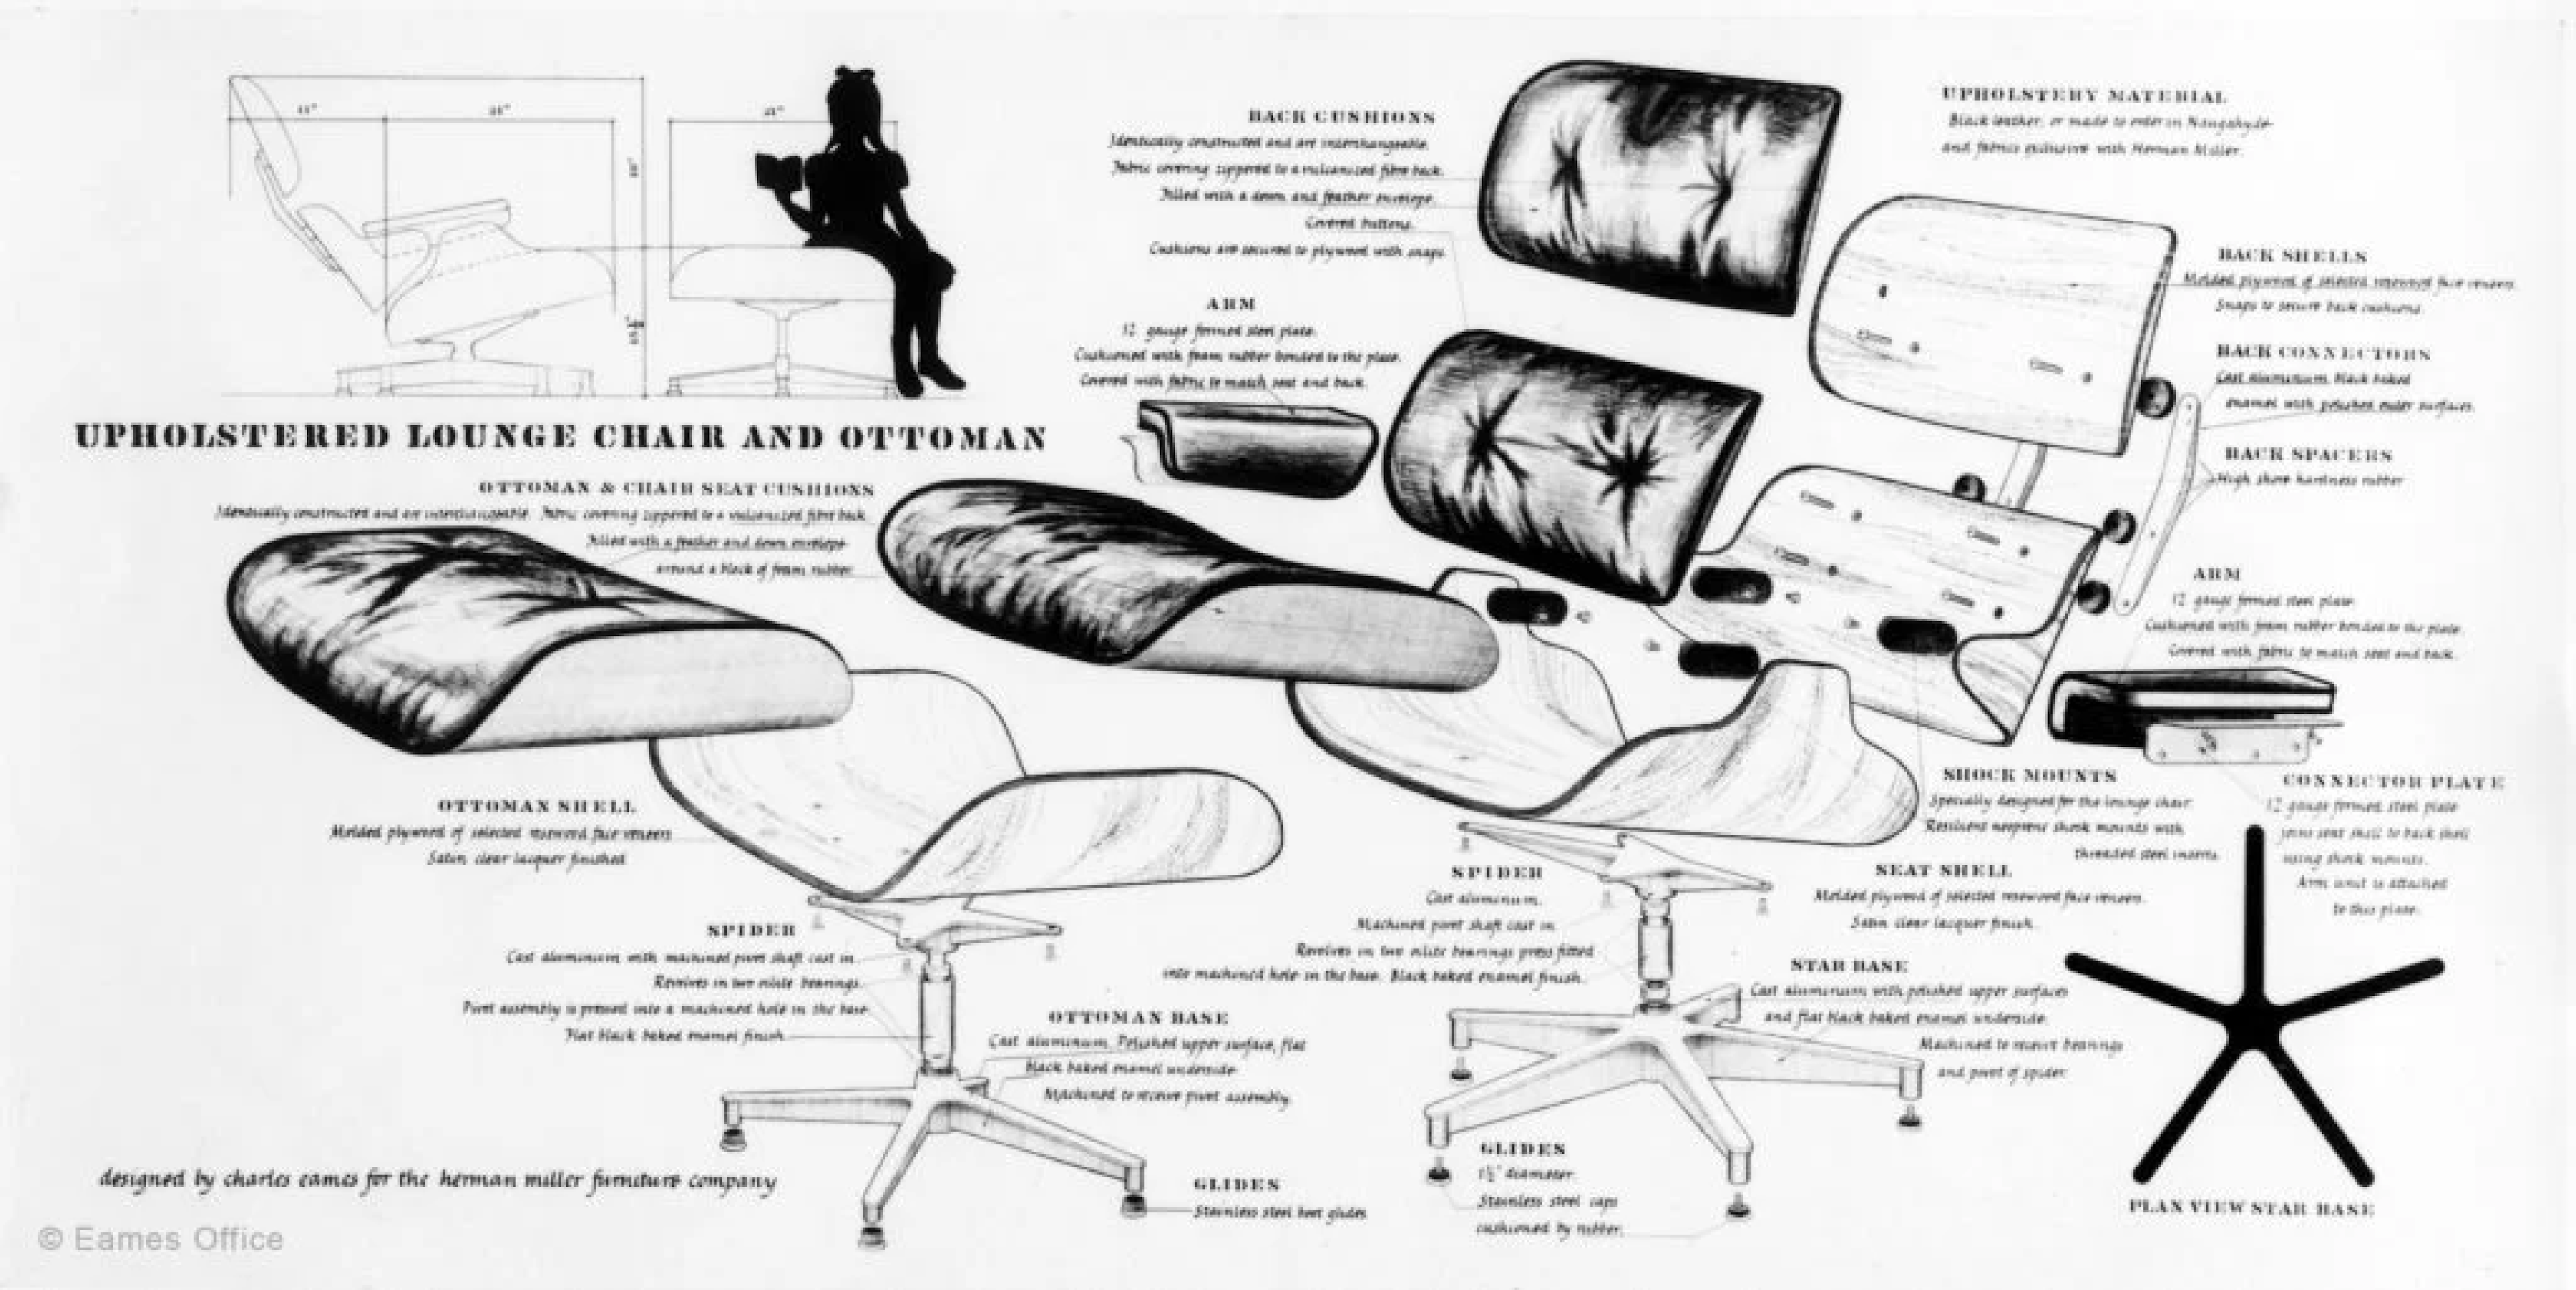 Eames Lounge Chair full image